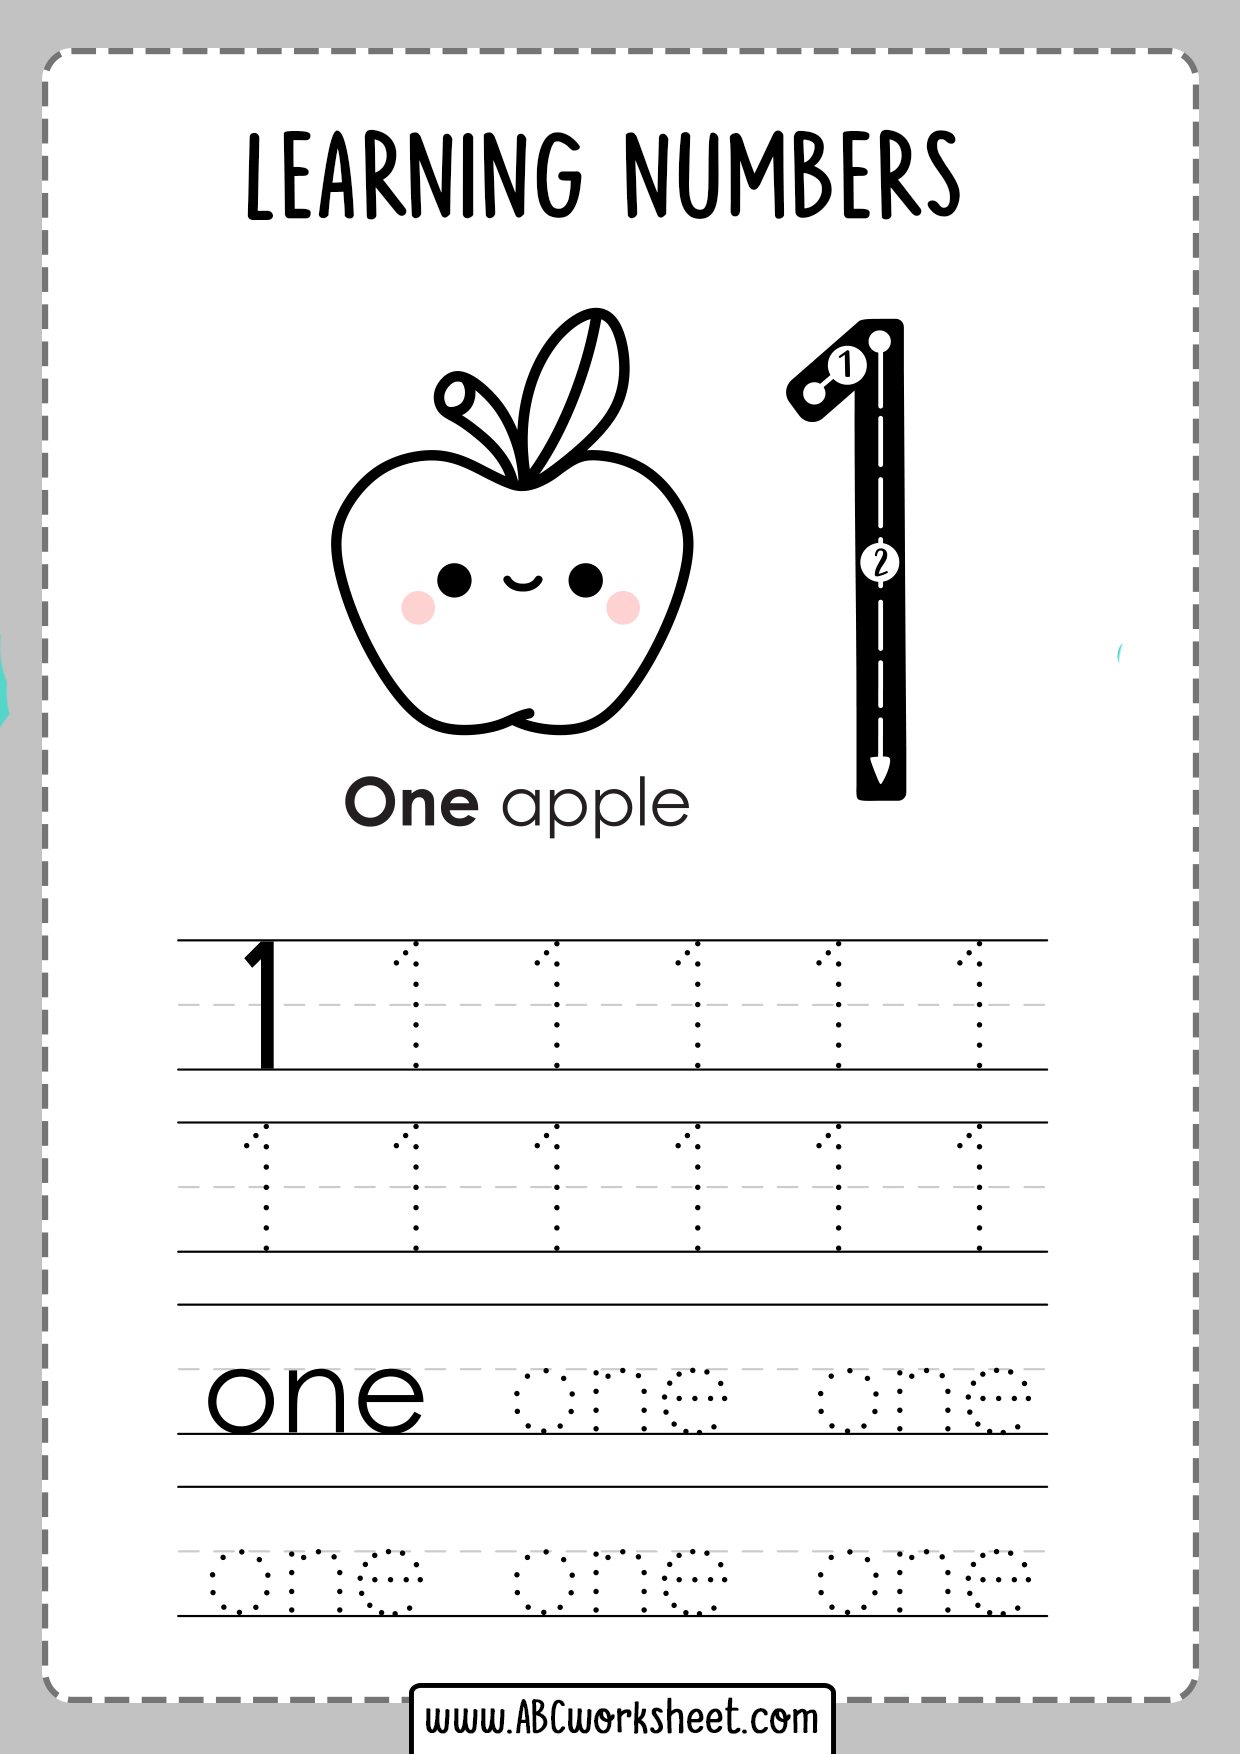 preschool-lesson-plan-on-number-recognition-1-10-with-printables-number-trace-worksheets-for